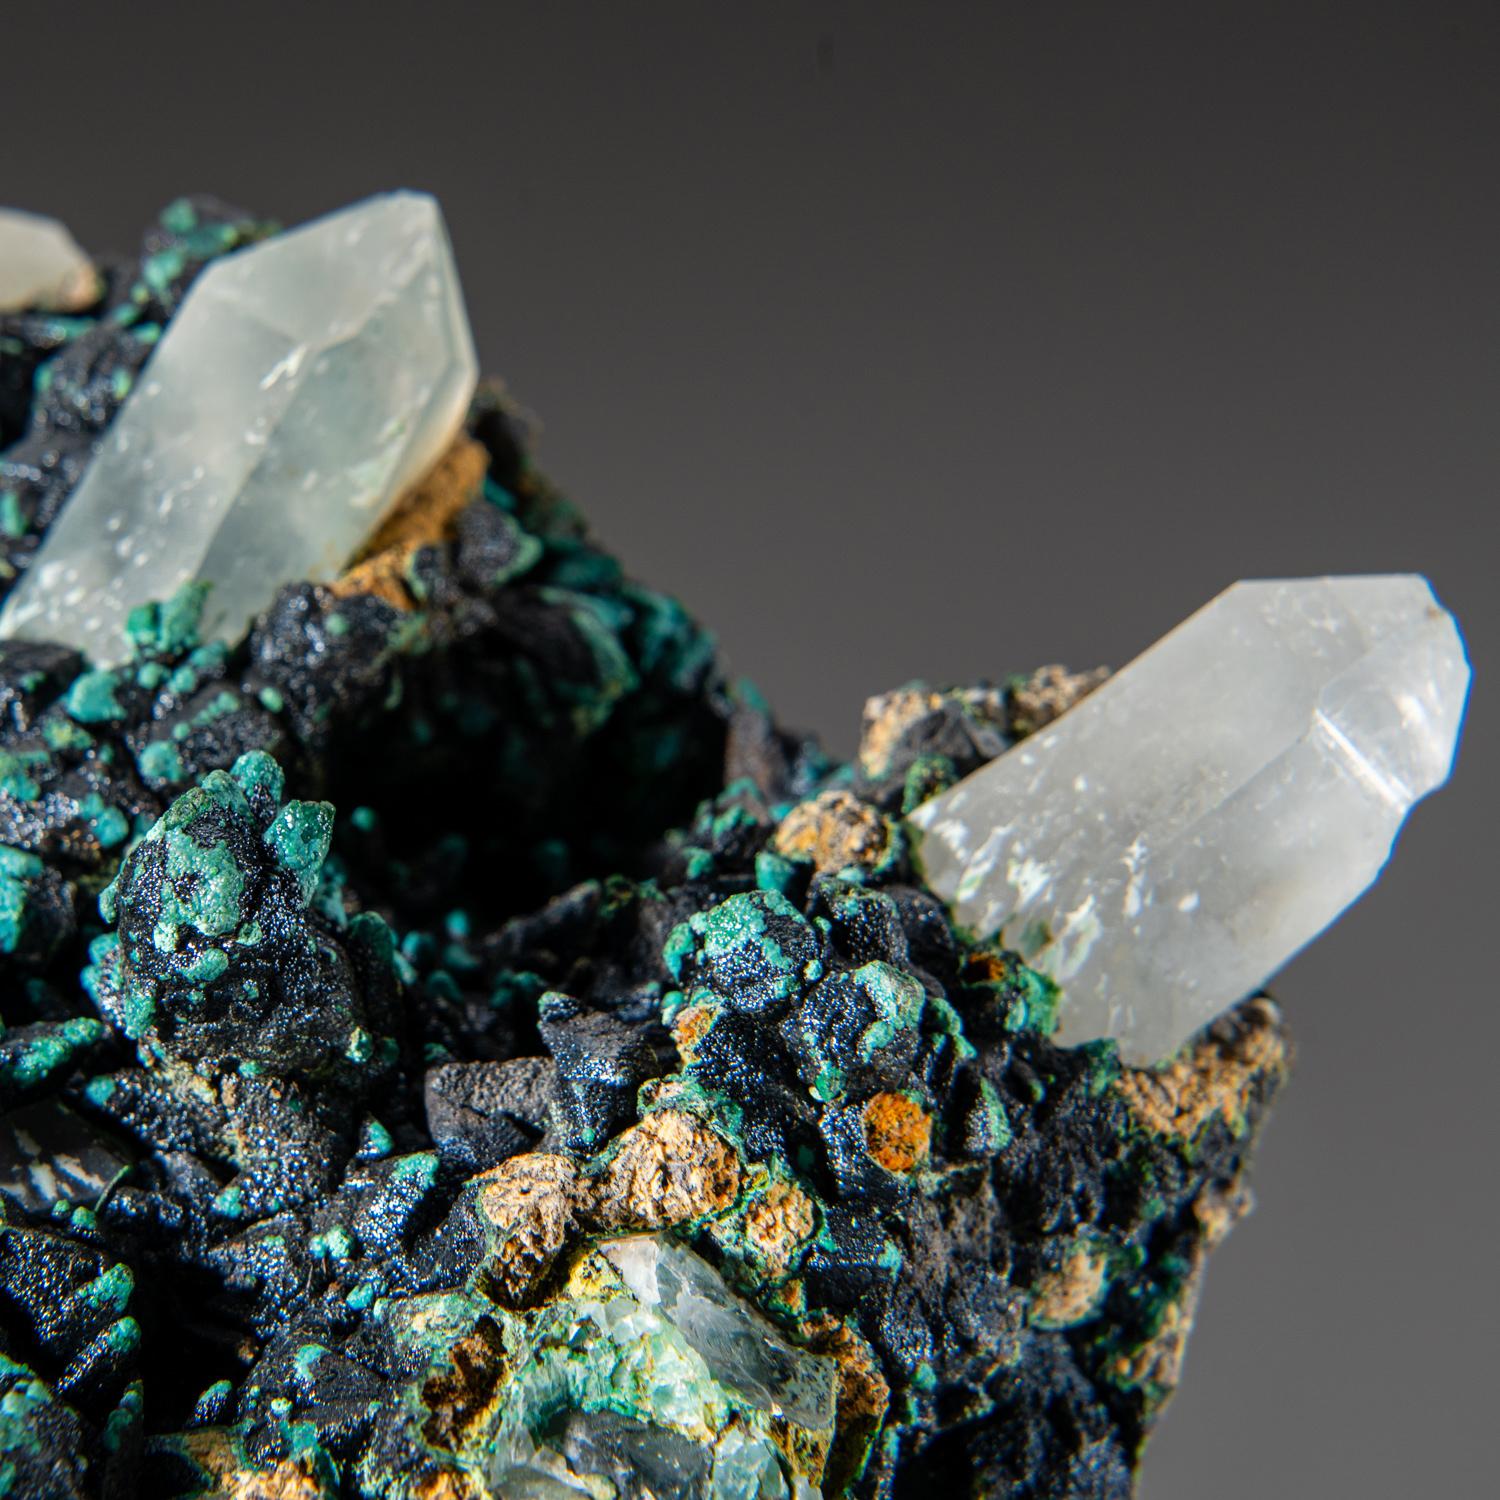 From Ray Mine, Mineral Creek District, Pinal County, Arizona

Bright blue micro crystal coating of chrysocolla over quartz crystal Custer matrix. The contrast of the chrysocolla against the matrix is very attractive.

Weight: 8.1 lbs,  Dimensions: 6